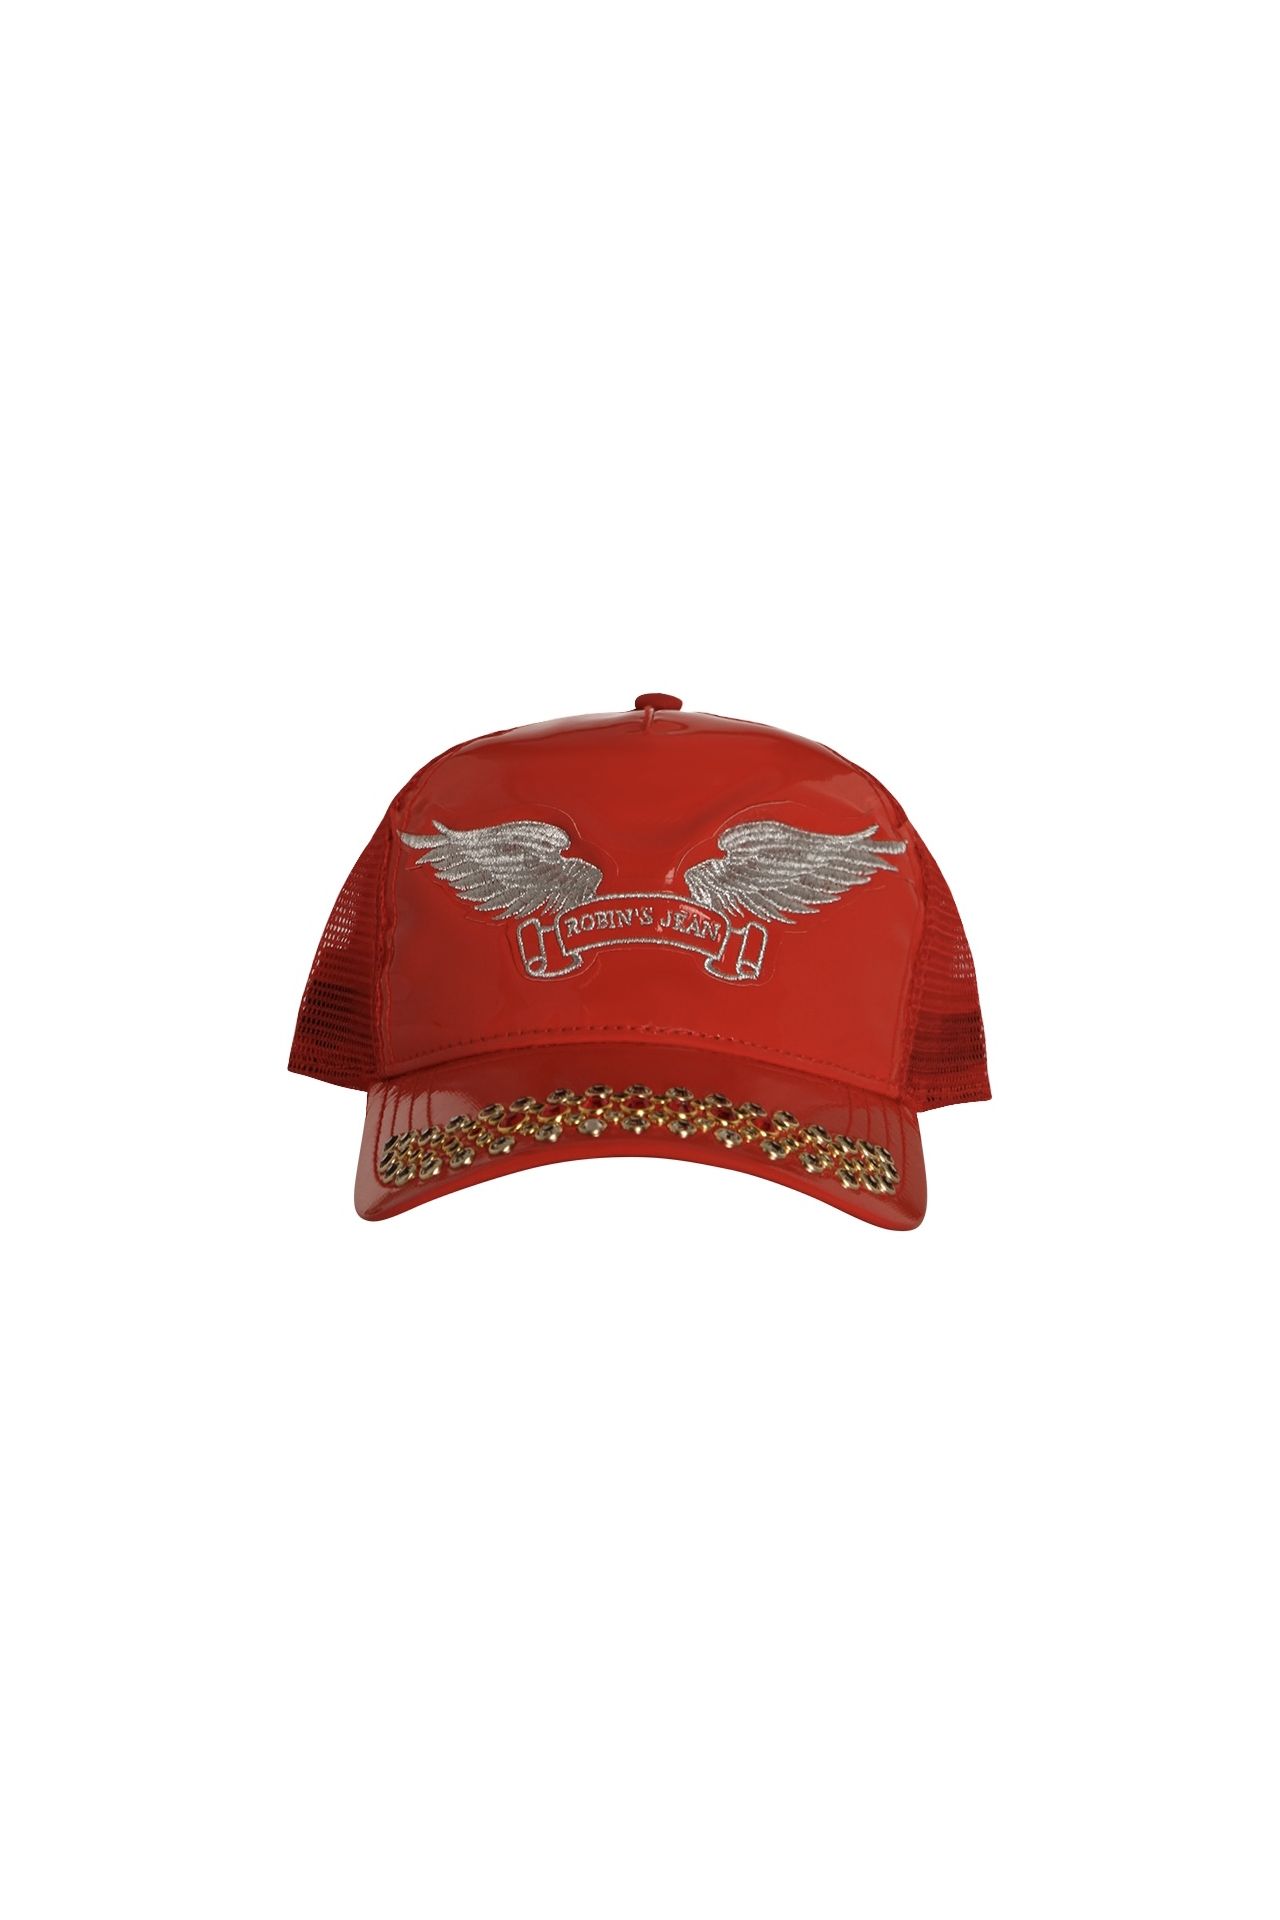 TRUCKER CAP IN PATENT RED WITH SILVER WINGS AND CRYSTALS